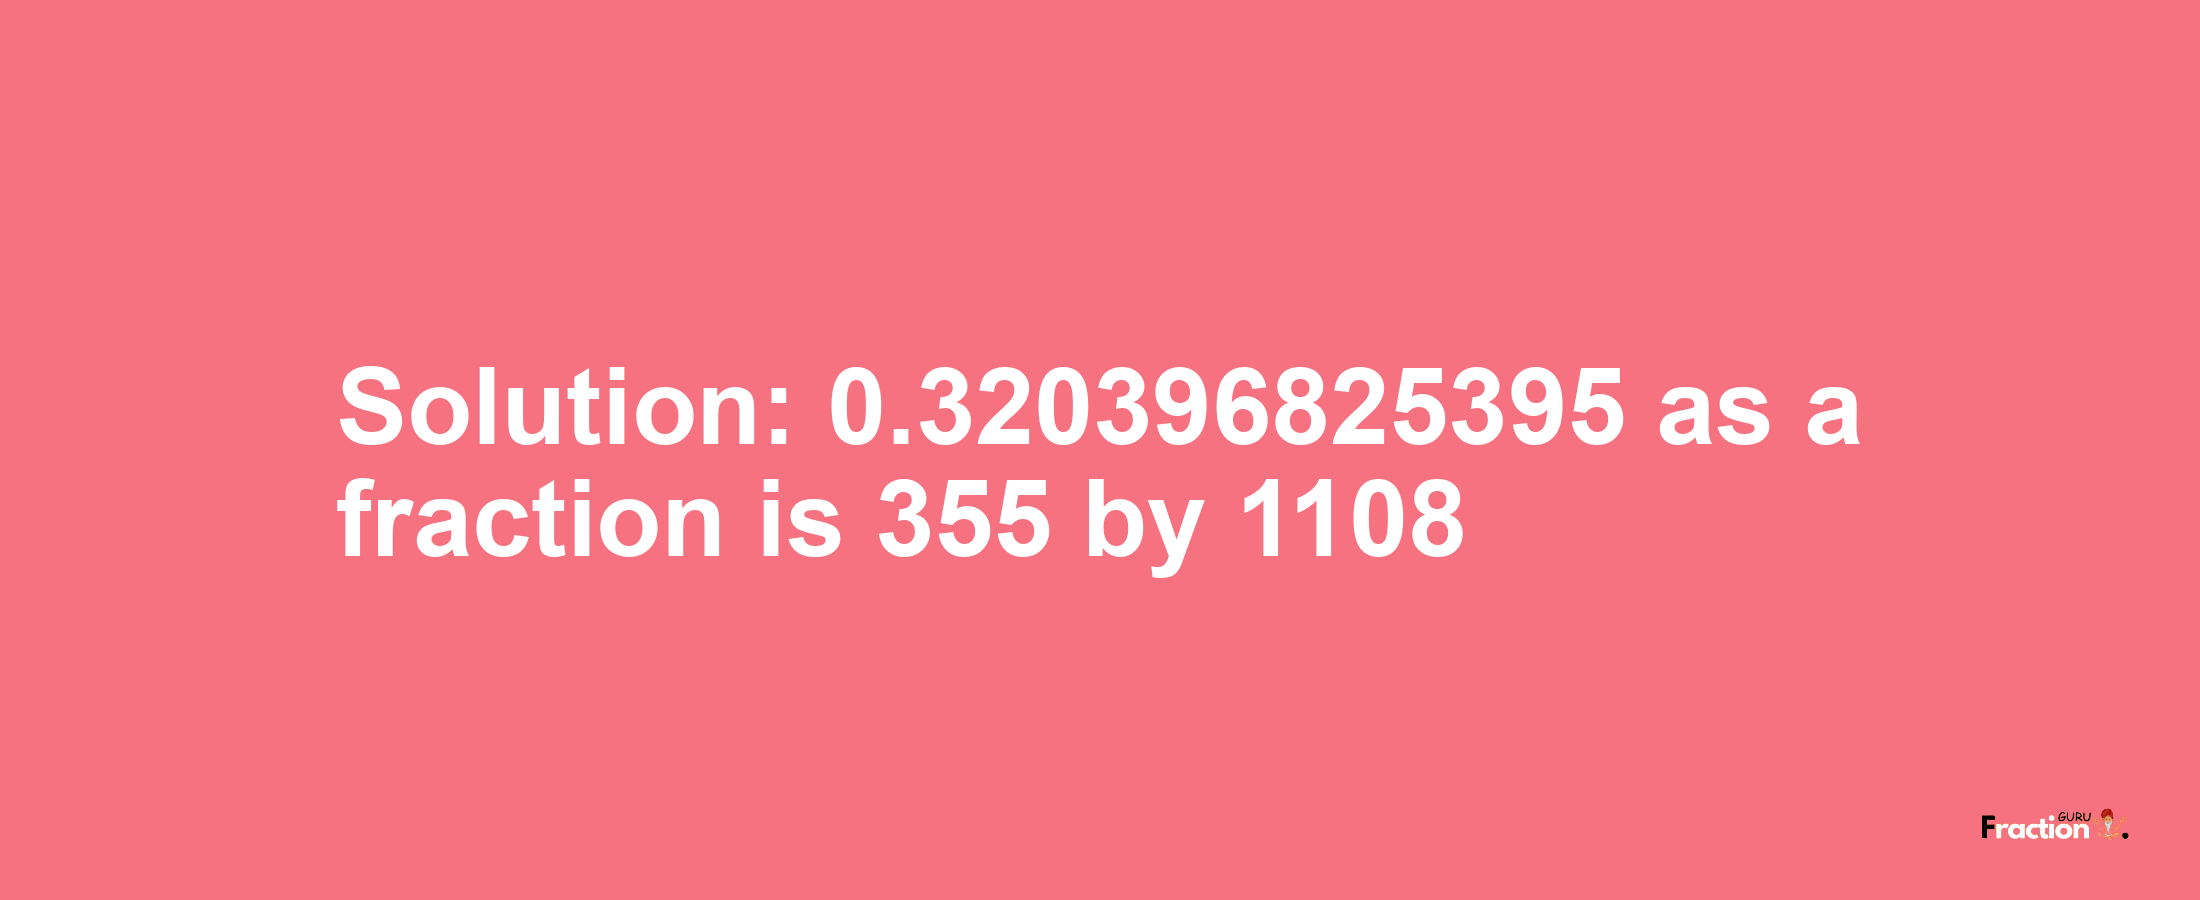 Solution:0.320396825395 as a fraction is 355/1108